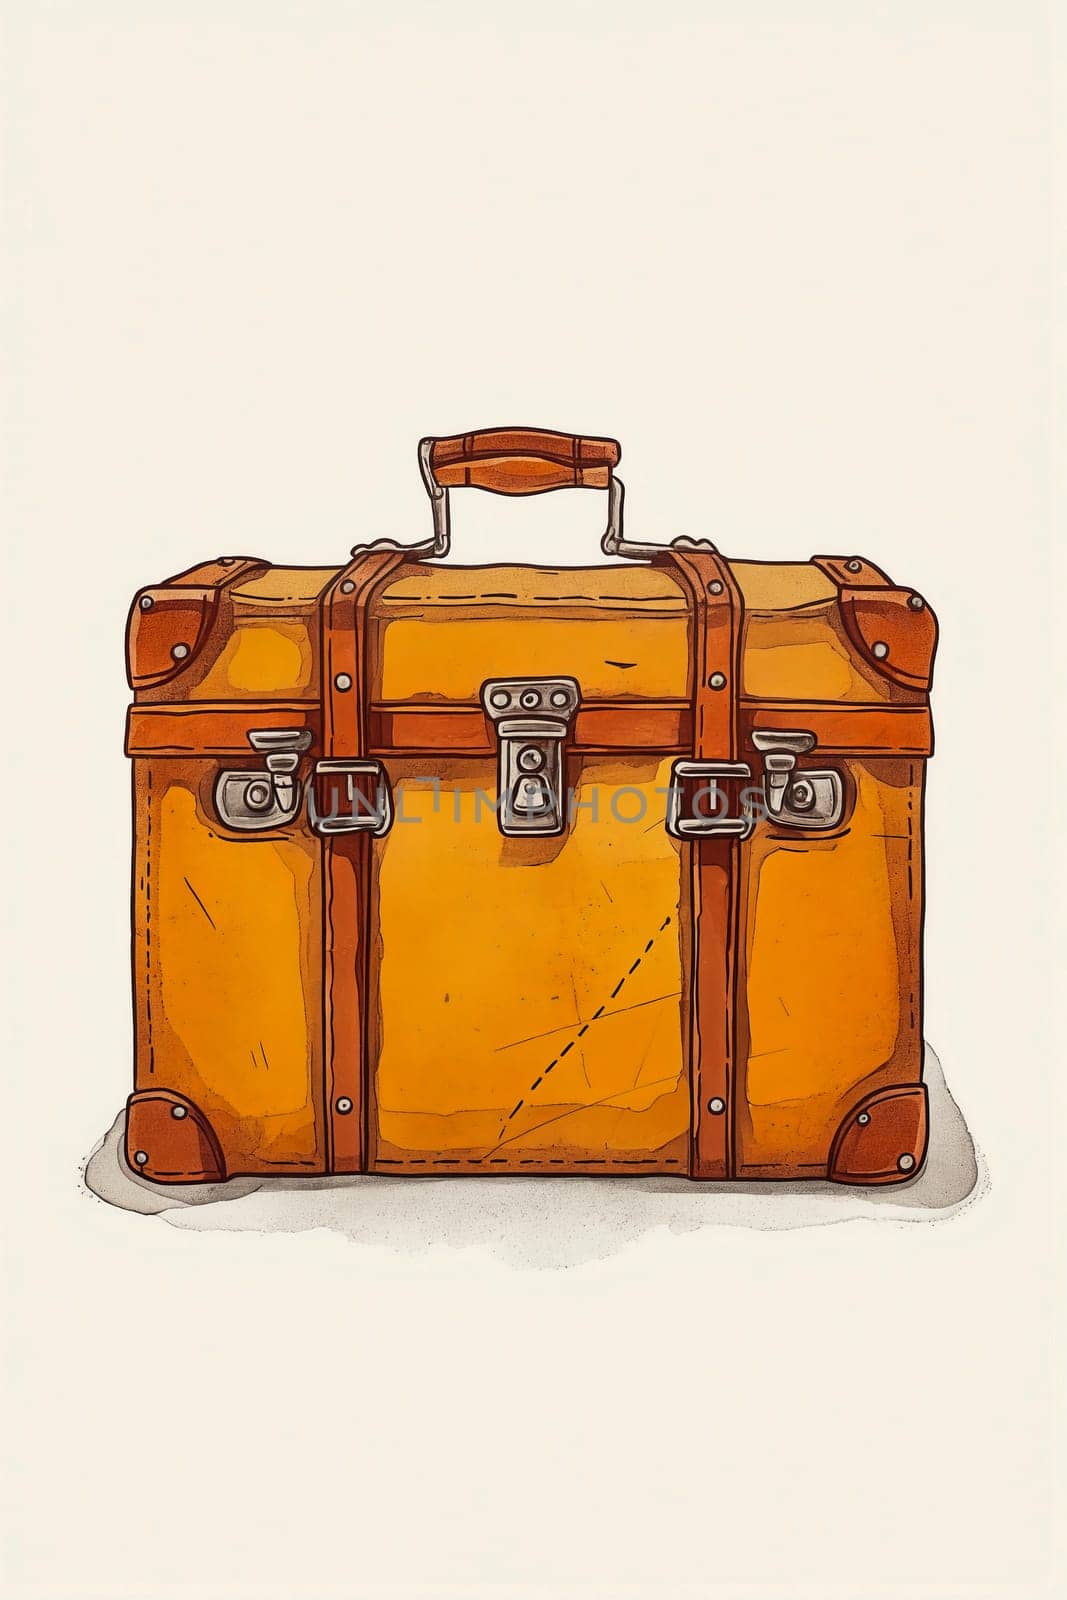 A vintage brown suitcase with a gold handle sits on a white background. The suitcase is old and worn, with a sense of nostalgia and adventure. The image evokes feelings of travel and exploration. Generative AI